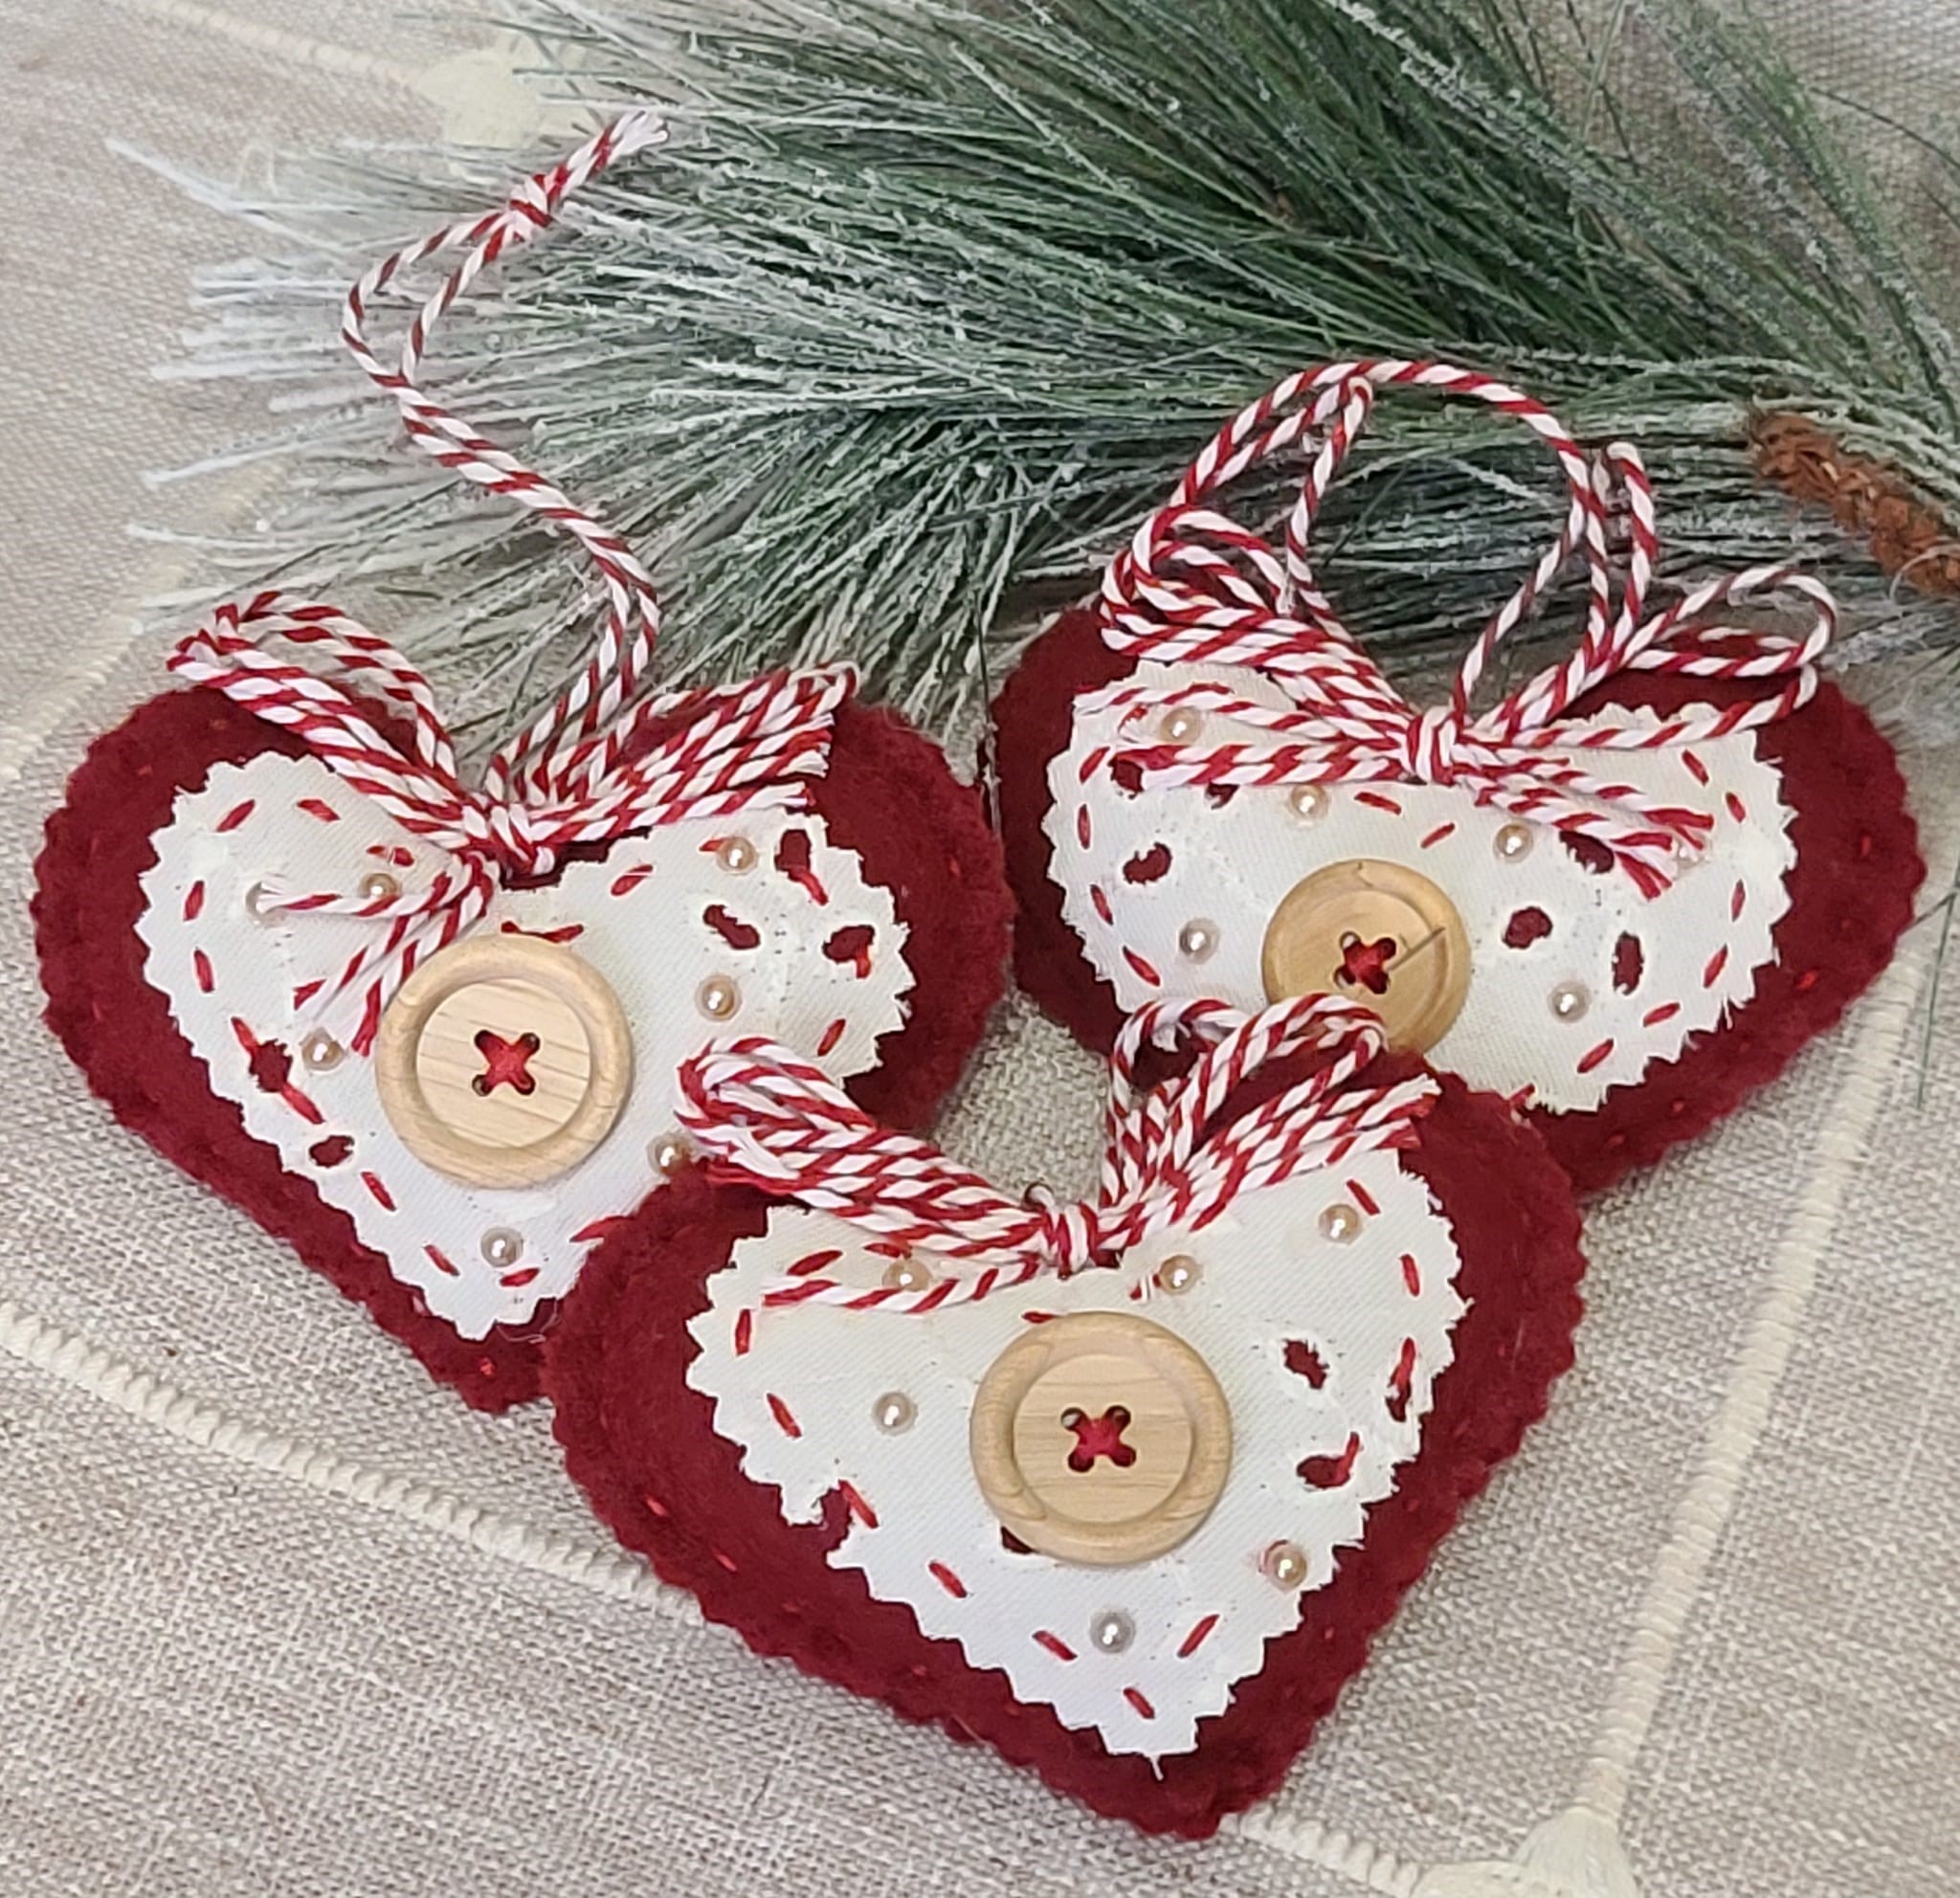 Valentine Day ornaments, handmade, red felt and lace hearts, bowl filler, heart ornaments, set of f3 - Click Image to Close